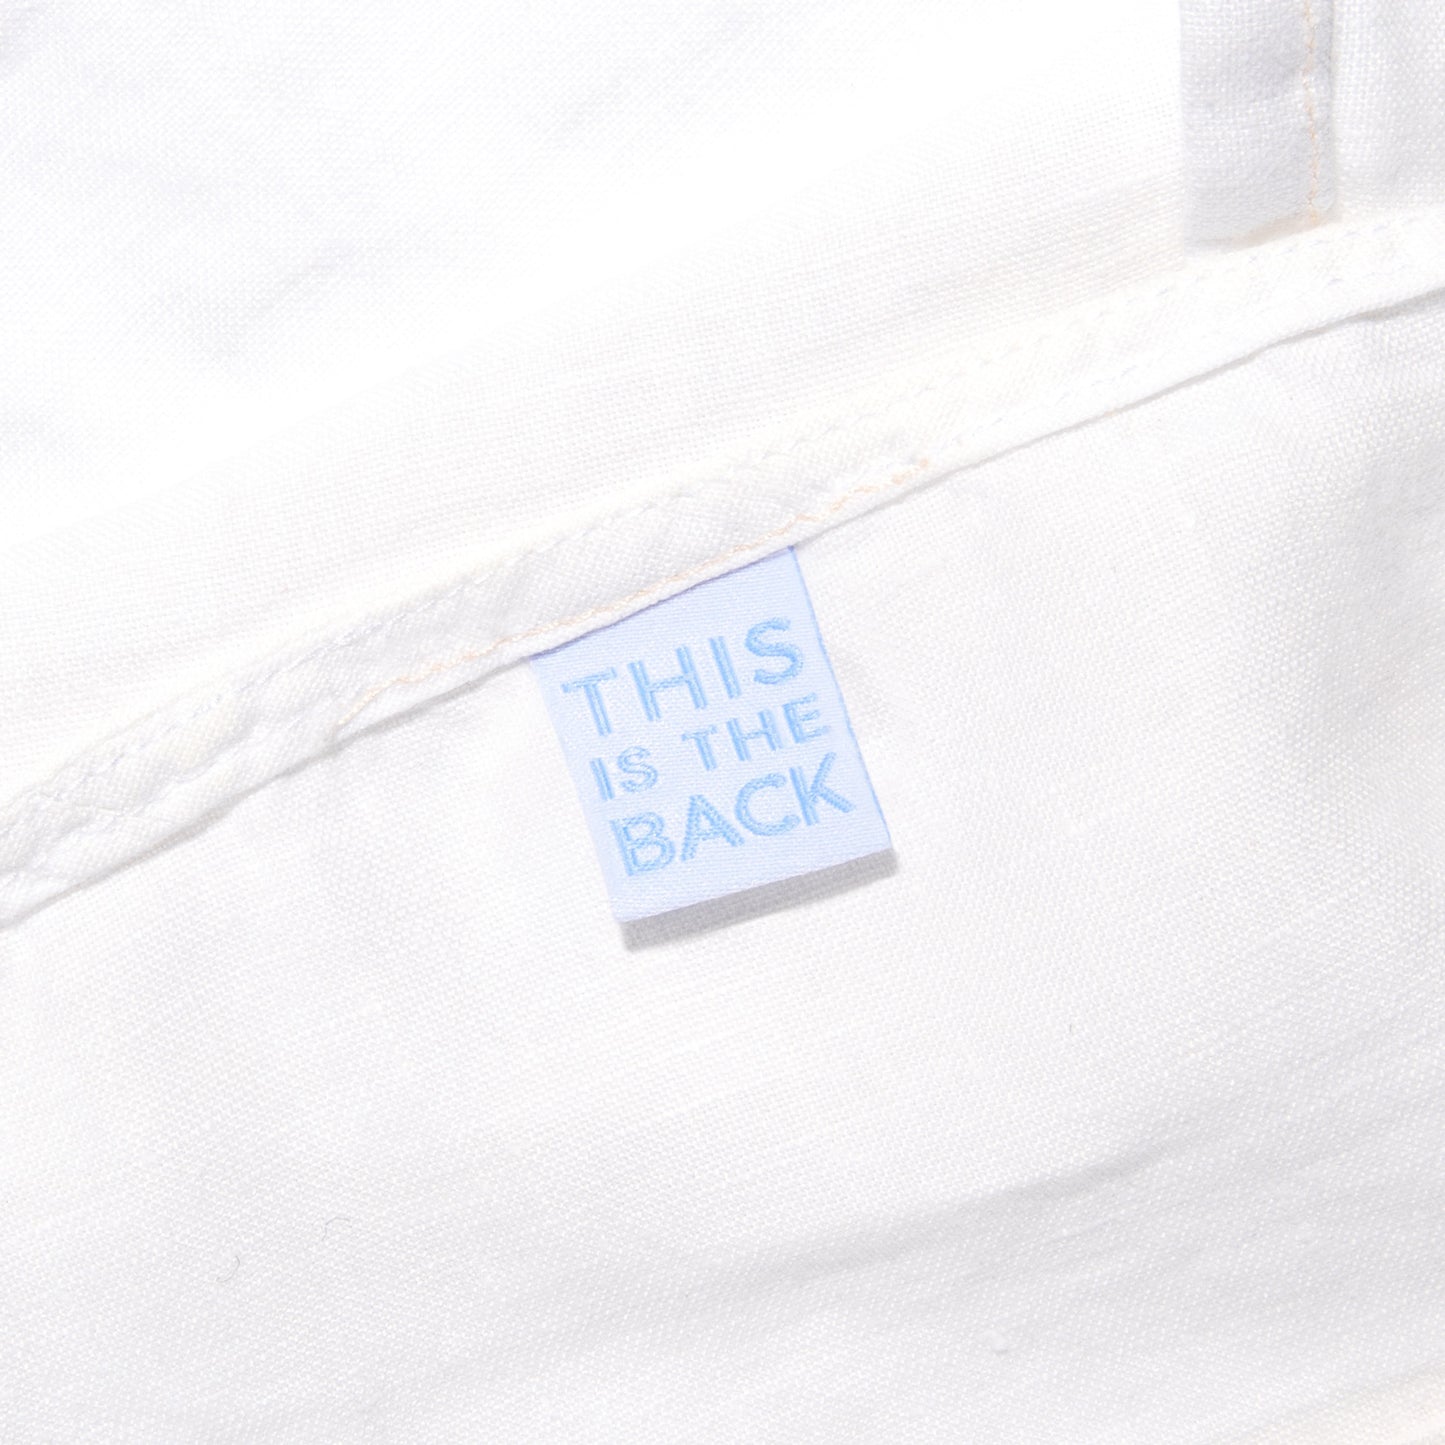 "This is the back" labels - KATM